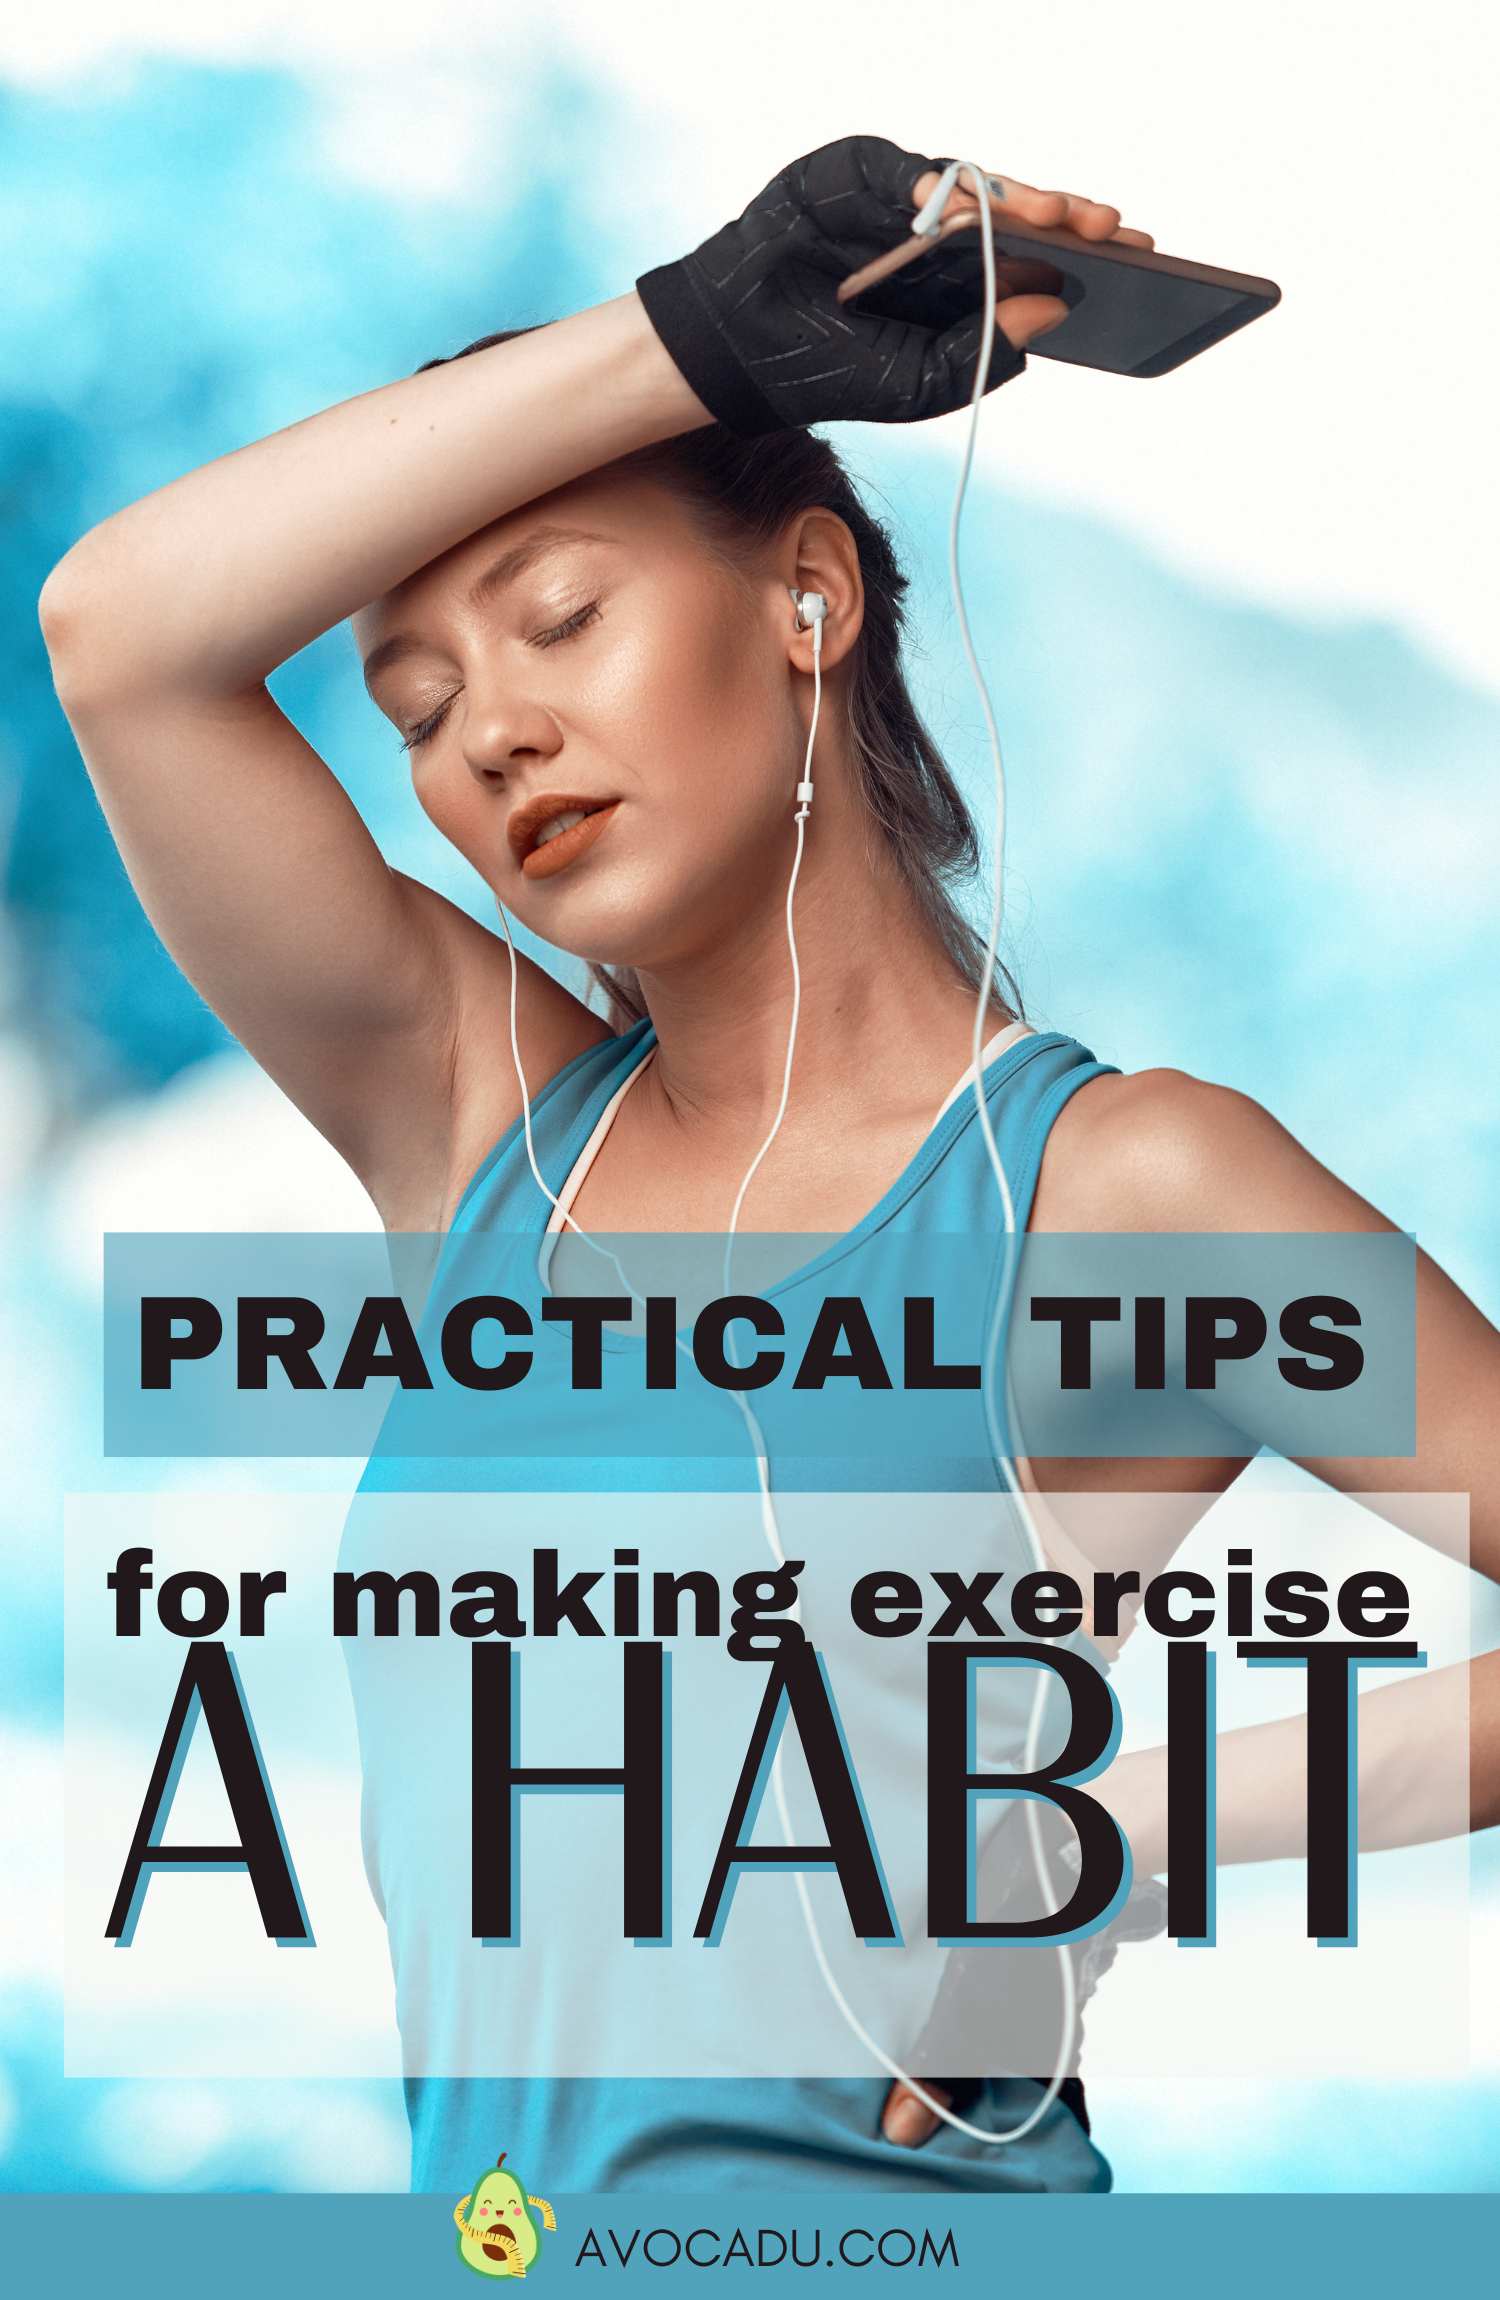 How to Make Exercise a Habit: Top Tips for Women
